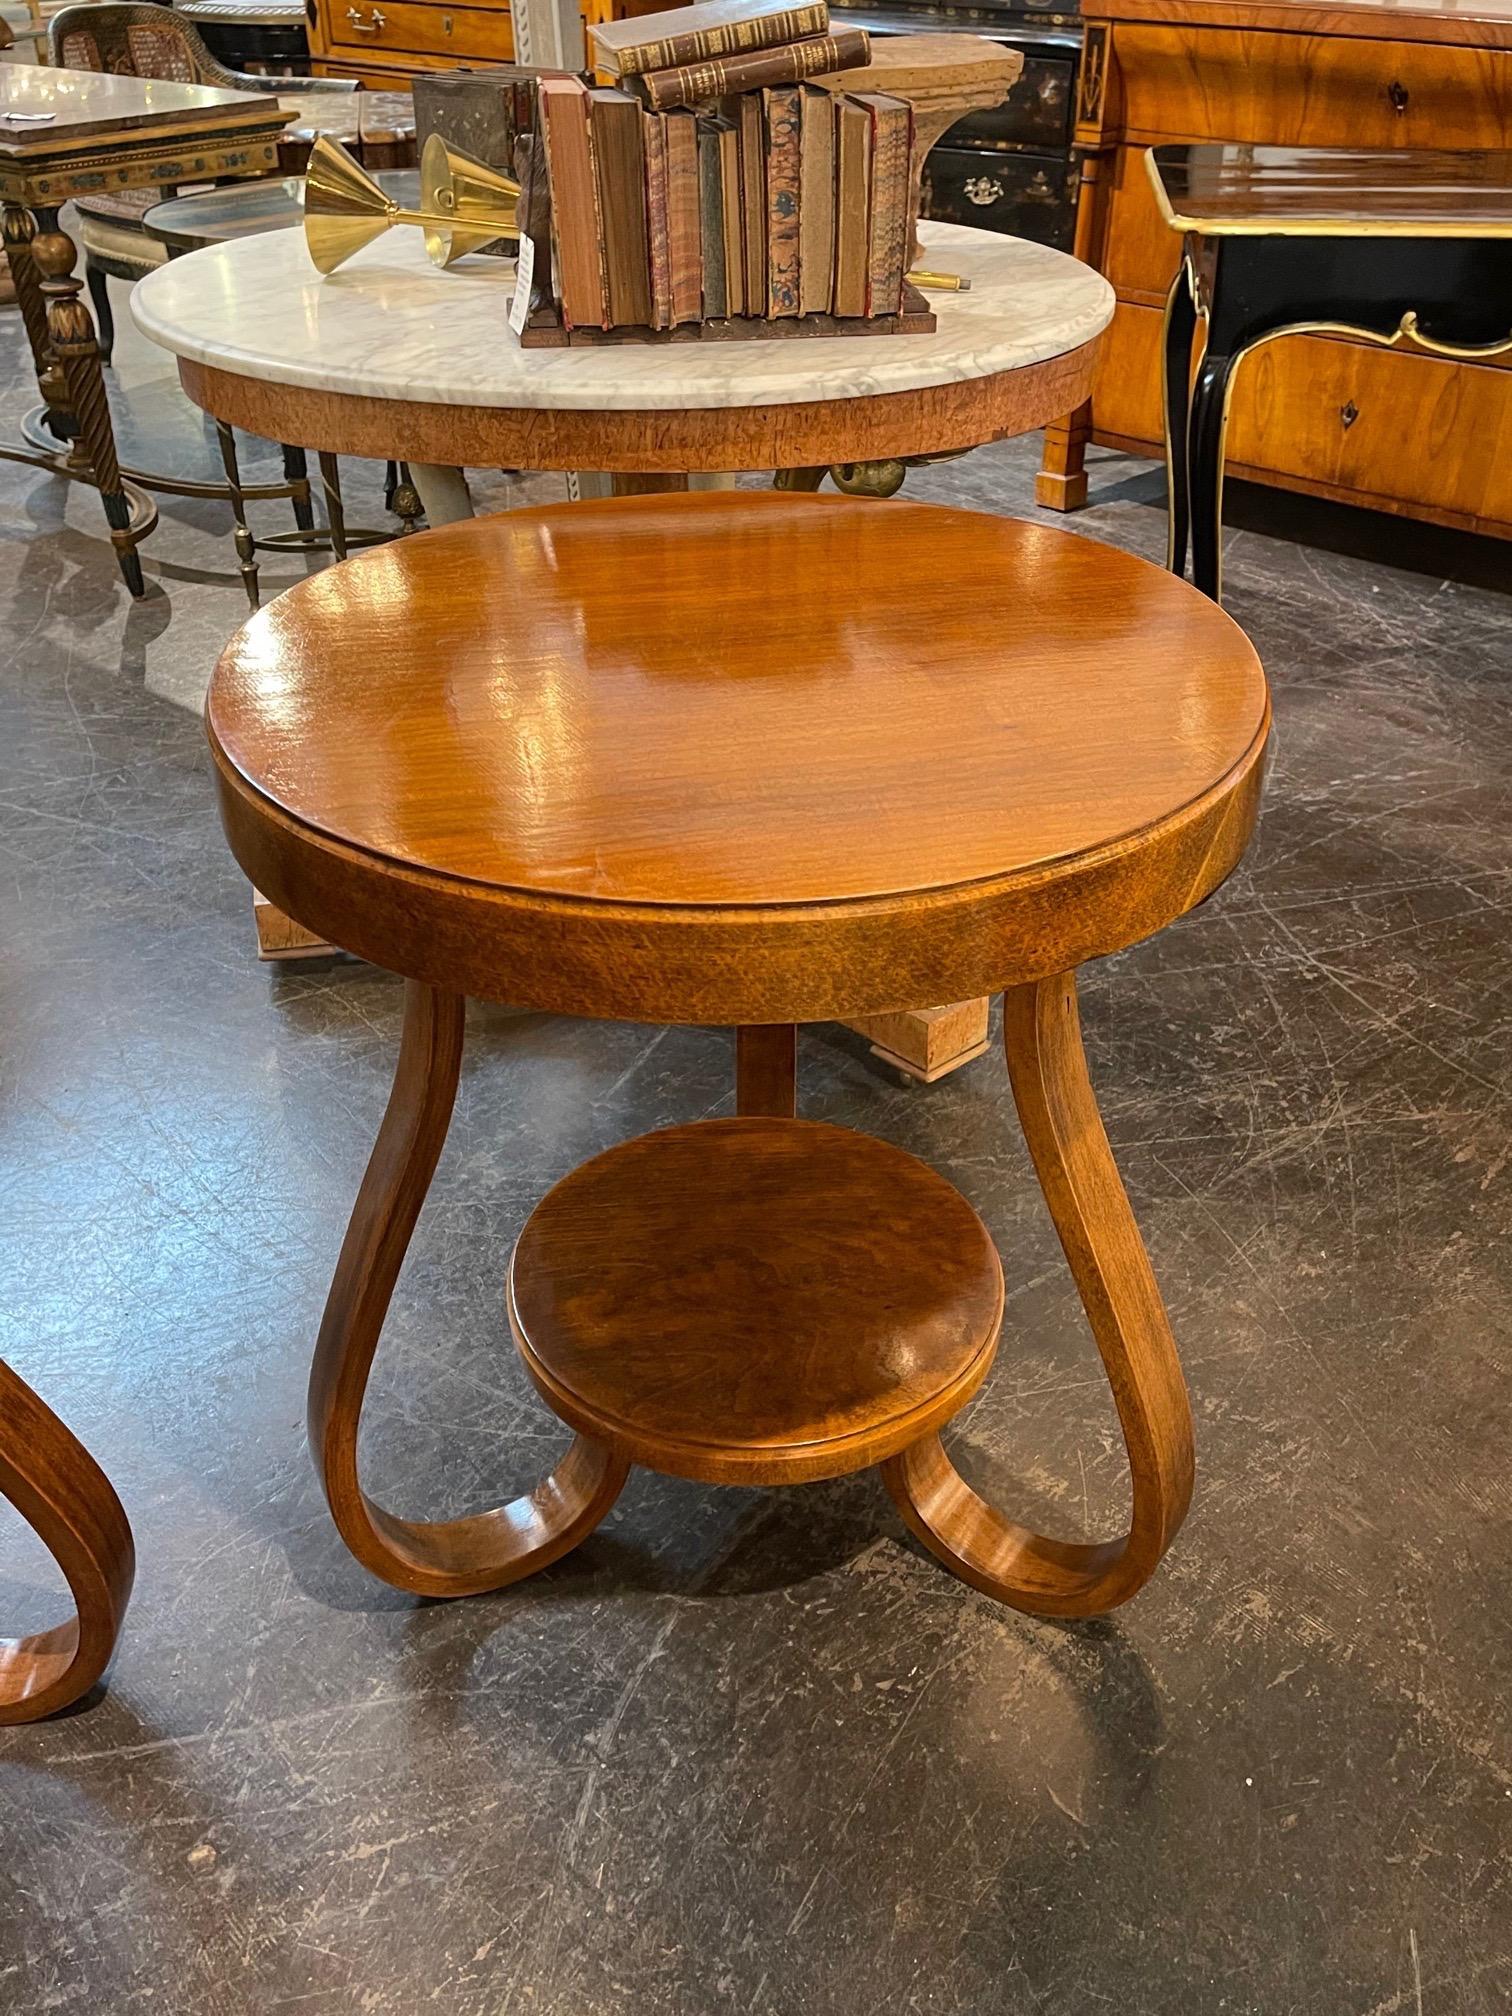 Gorgeous vintage Art Deco style walnut side tables. Beautiful polished finish on these stylish tables. Fabulous!
Note: One sold.  Have one available